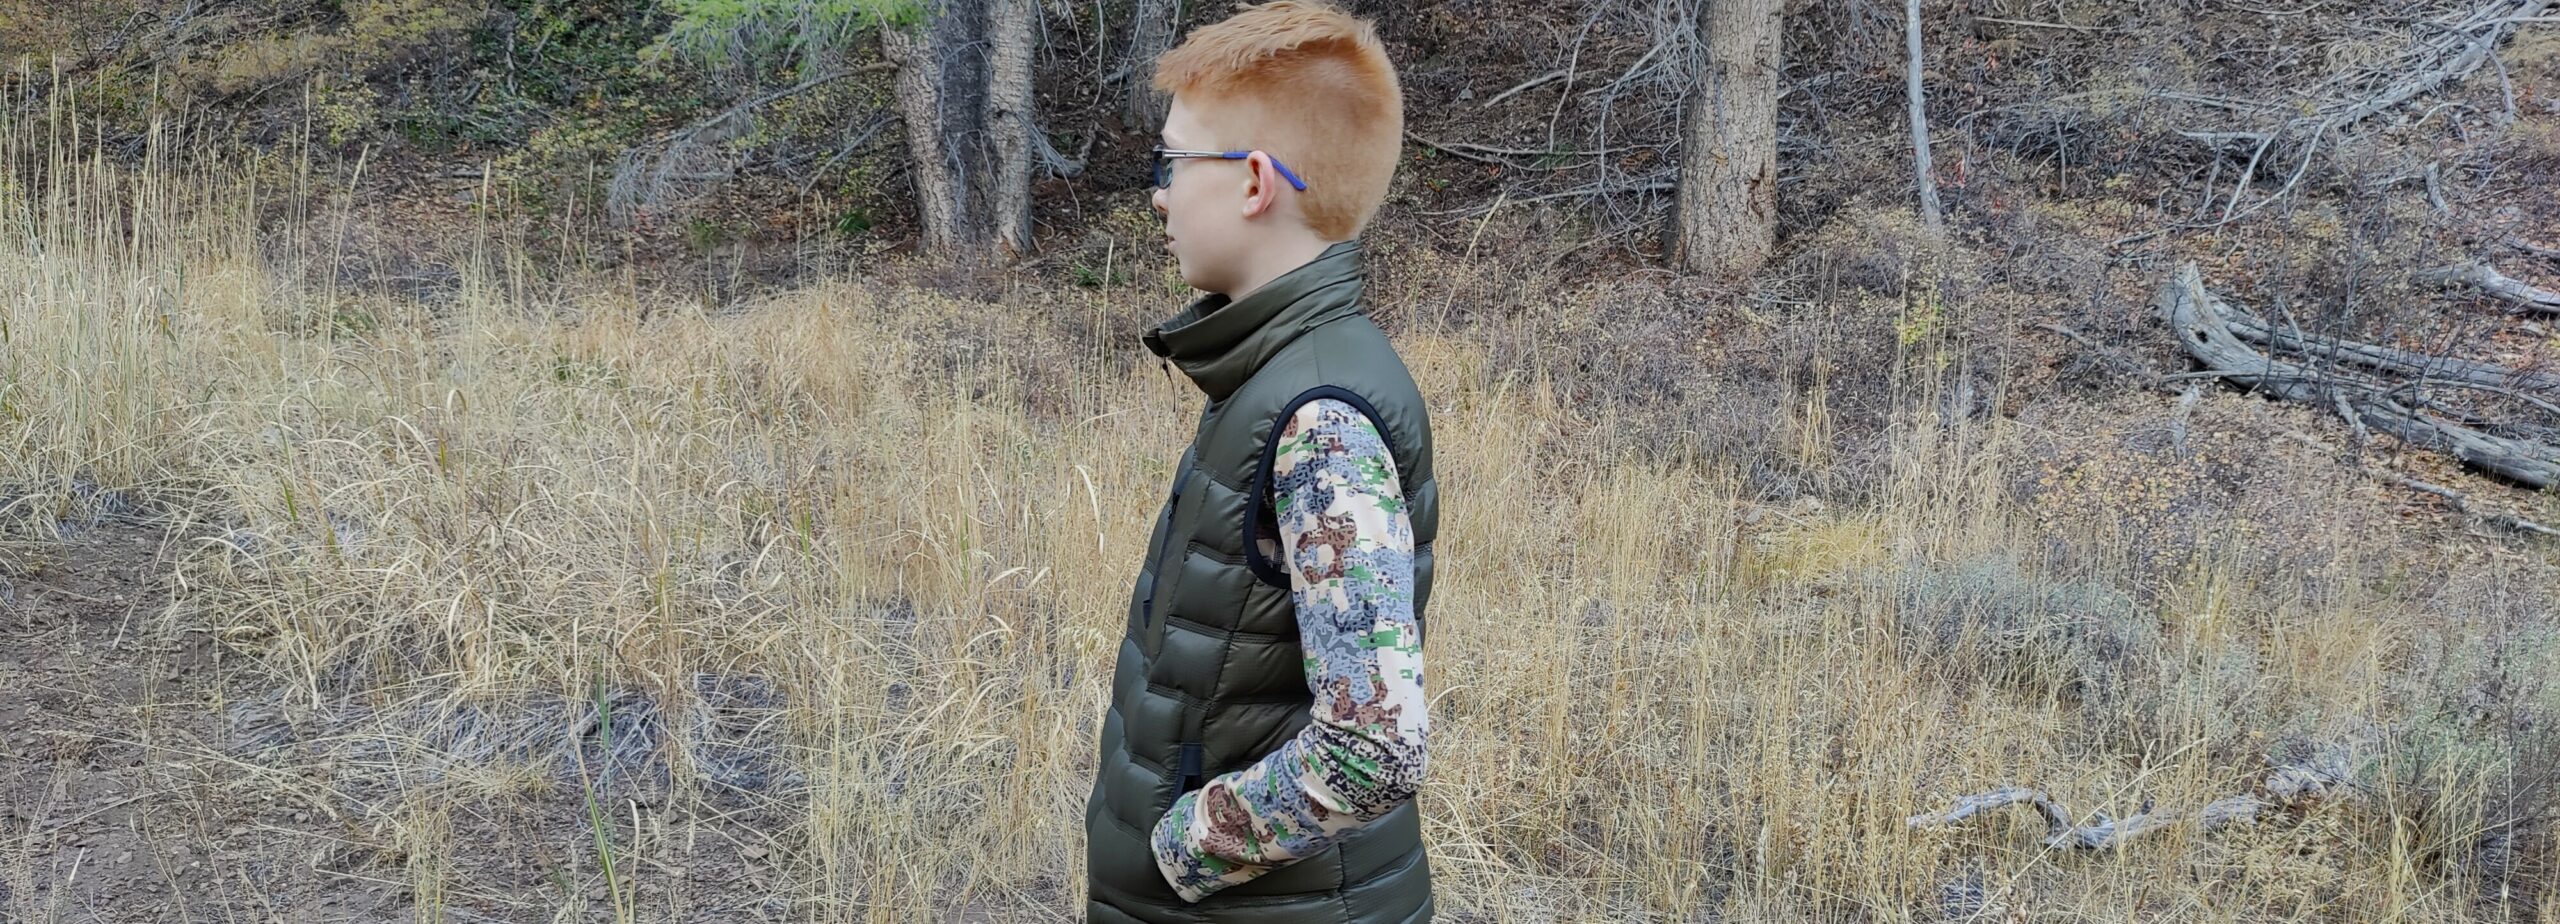 Best youth hunting clothes - Forloh Youth hunting camo clothing